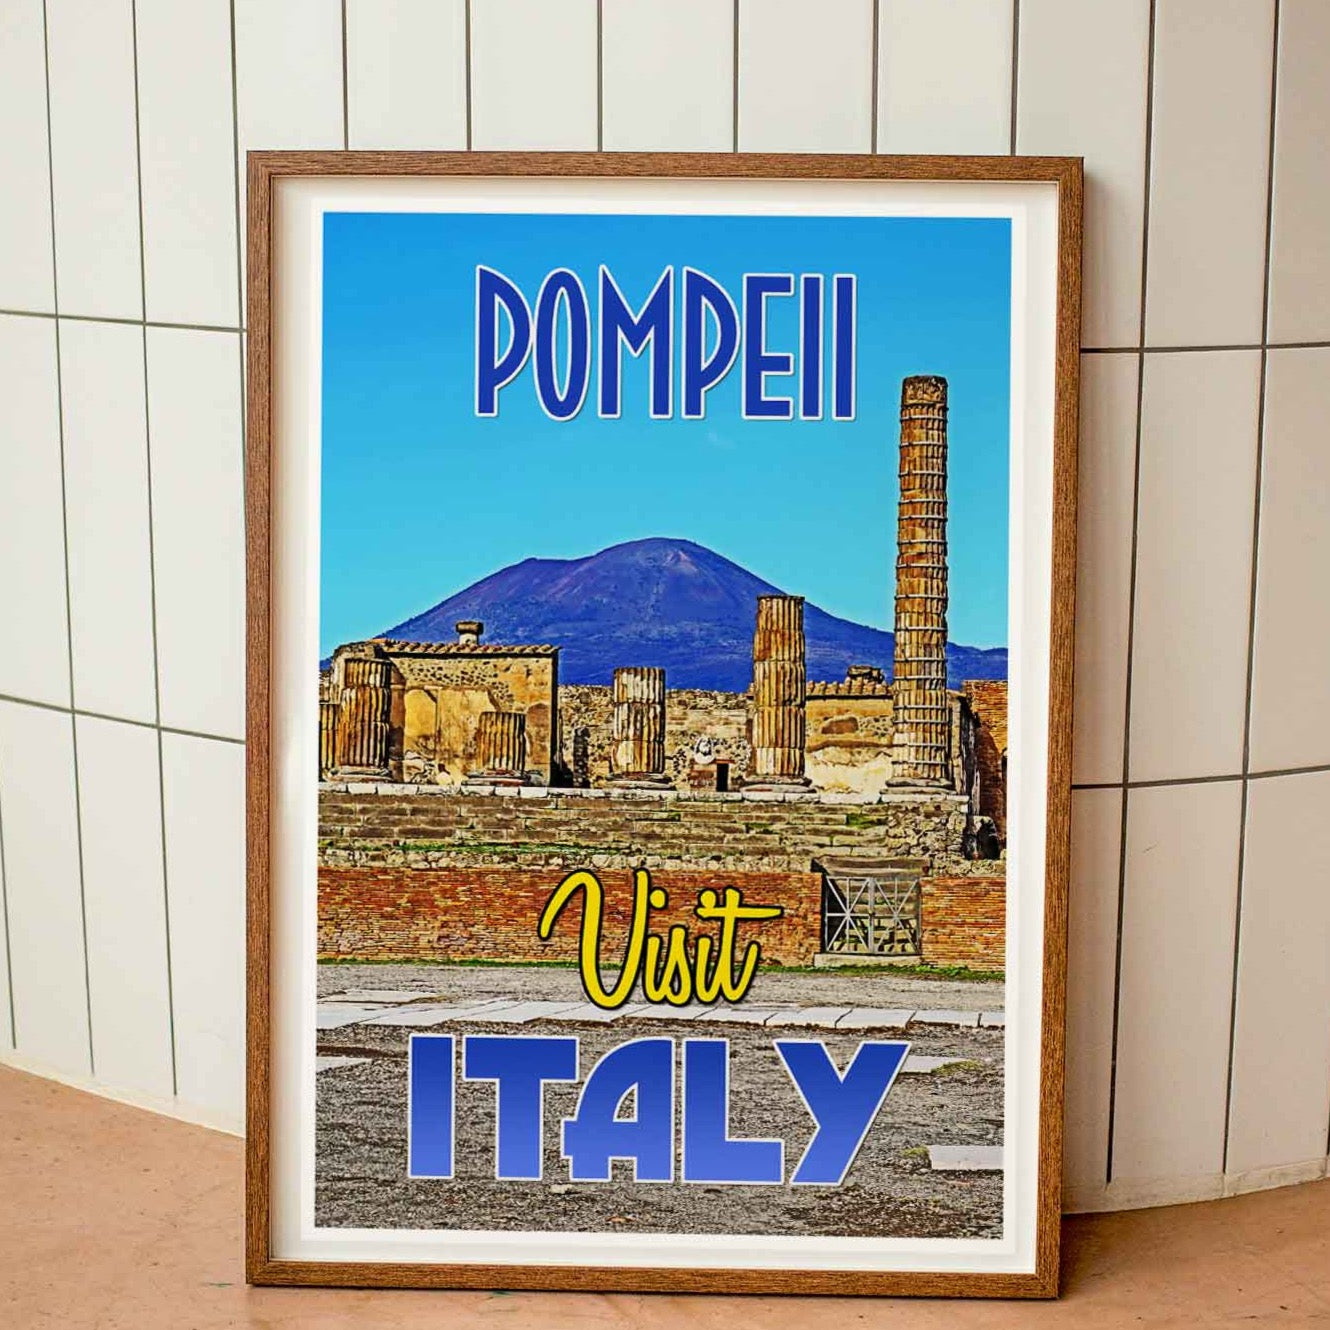 Wood-framed vintage travel poster print featuring the ancient ruins of Pompeii in Italy, embodying the adventure and appeal of emerging travel destinations worldwide